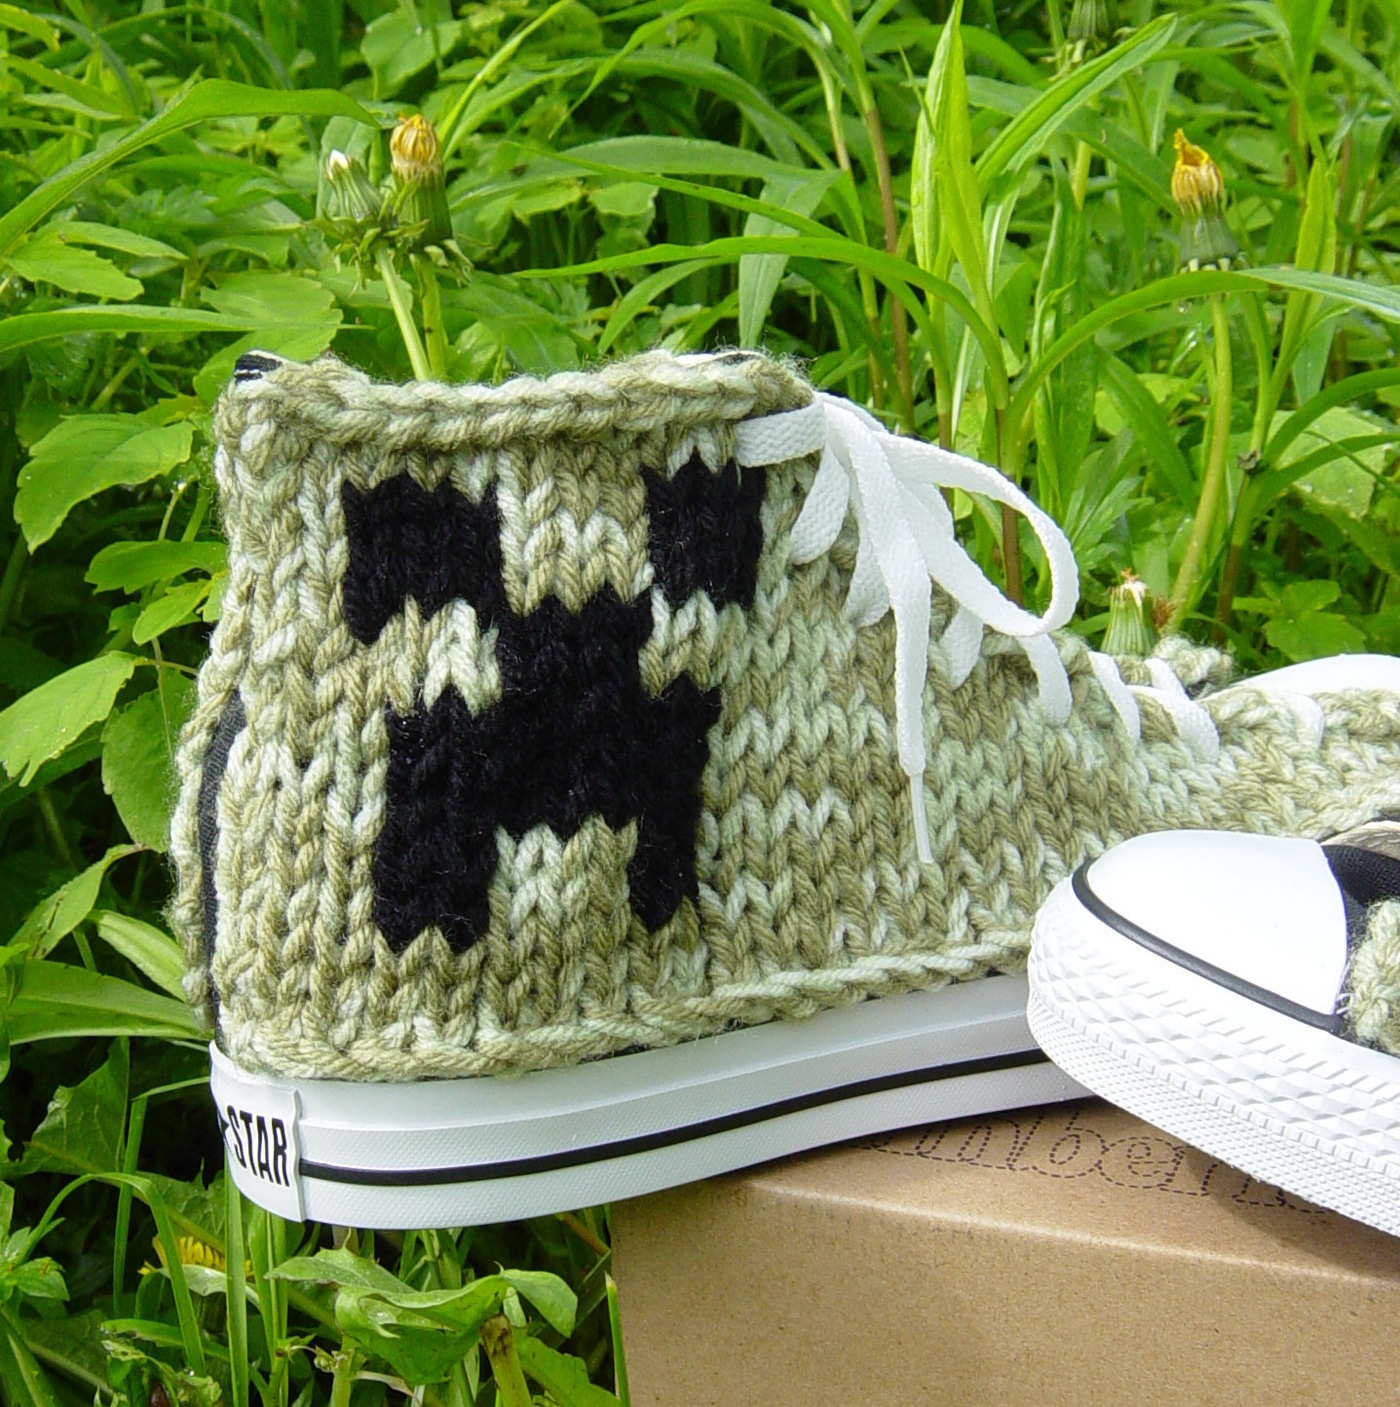 Knitted Converse Sneakers Let Your Inner Geek Come Out To Play